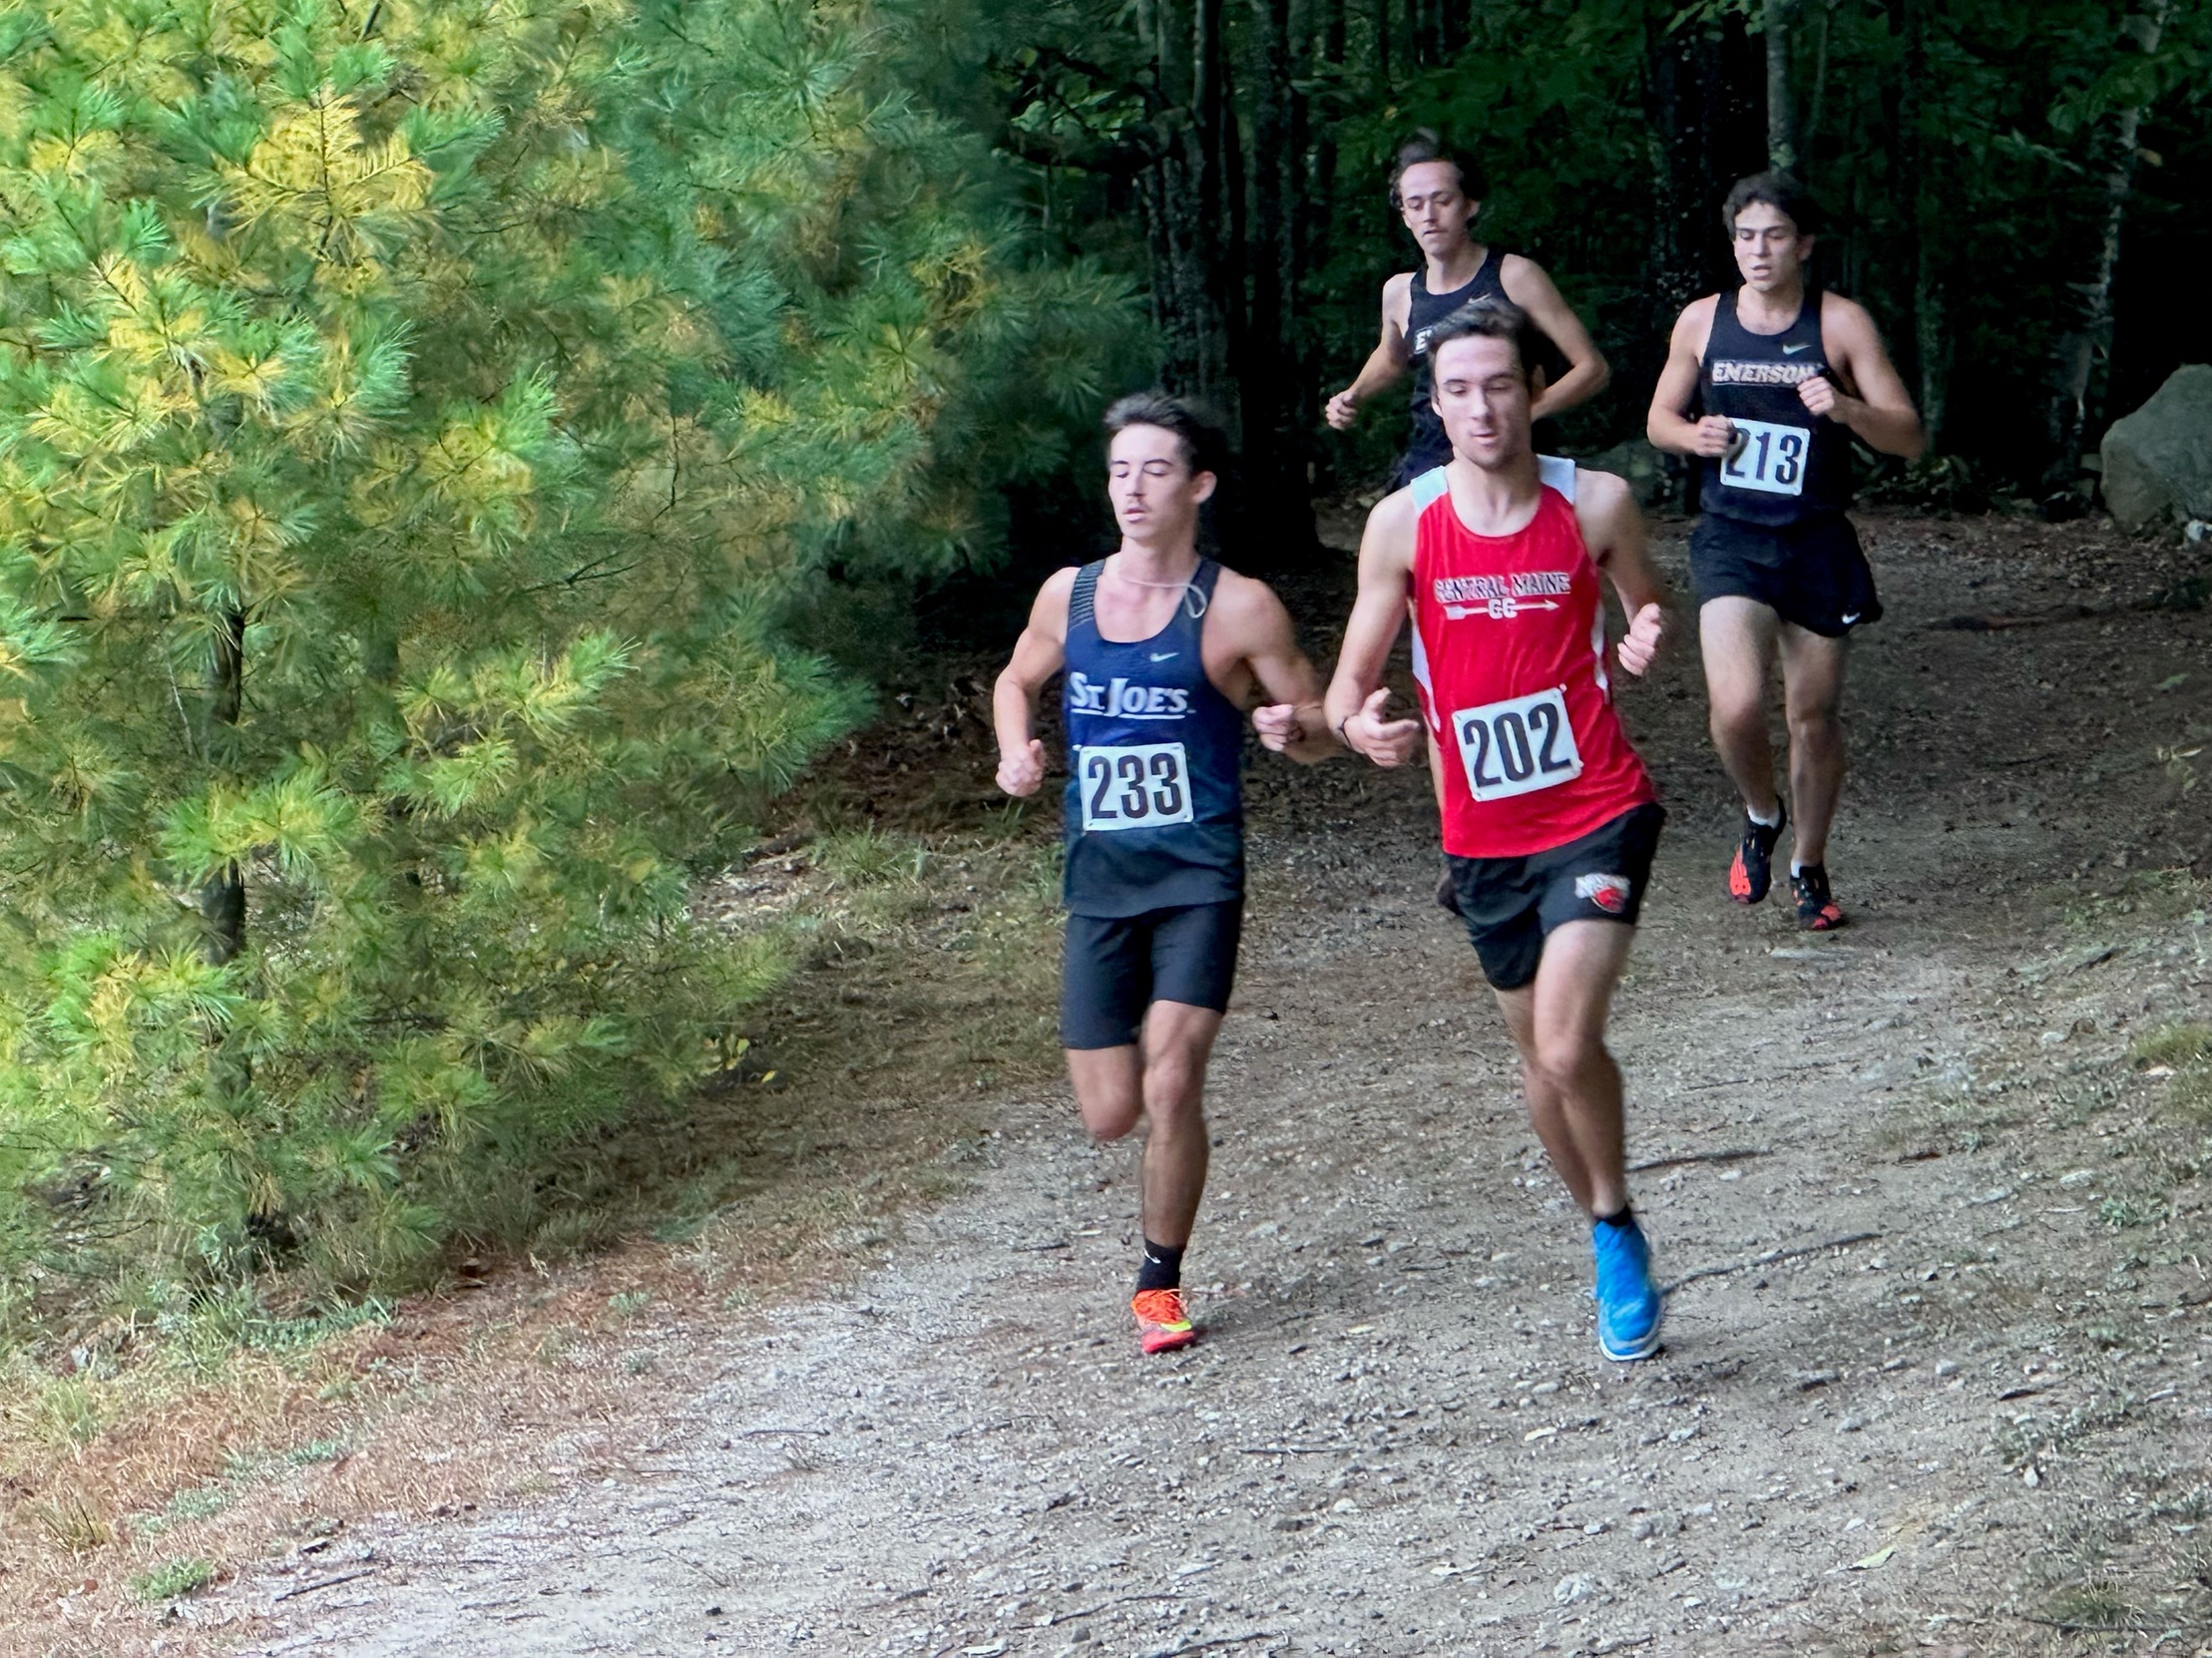 XC places 4th at Runnin’ Monks XC Challenge